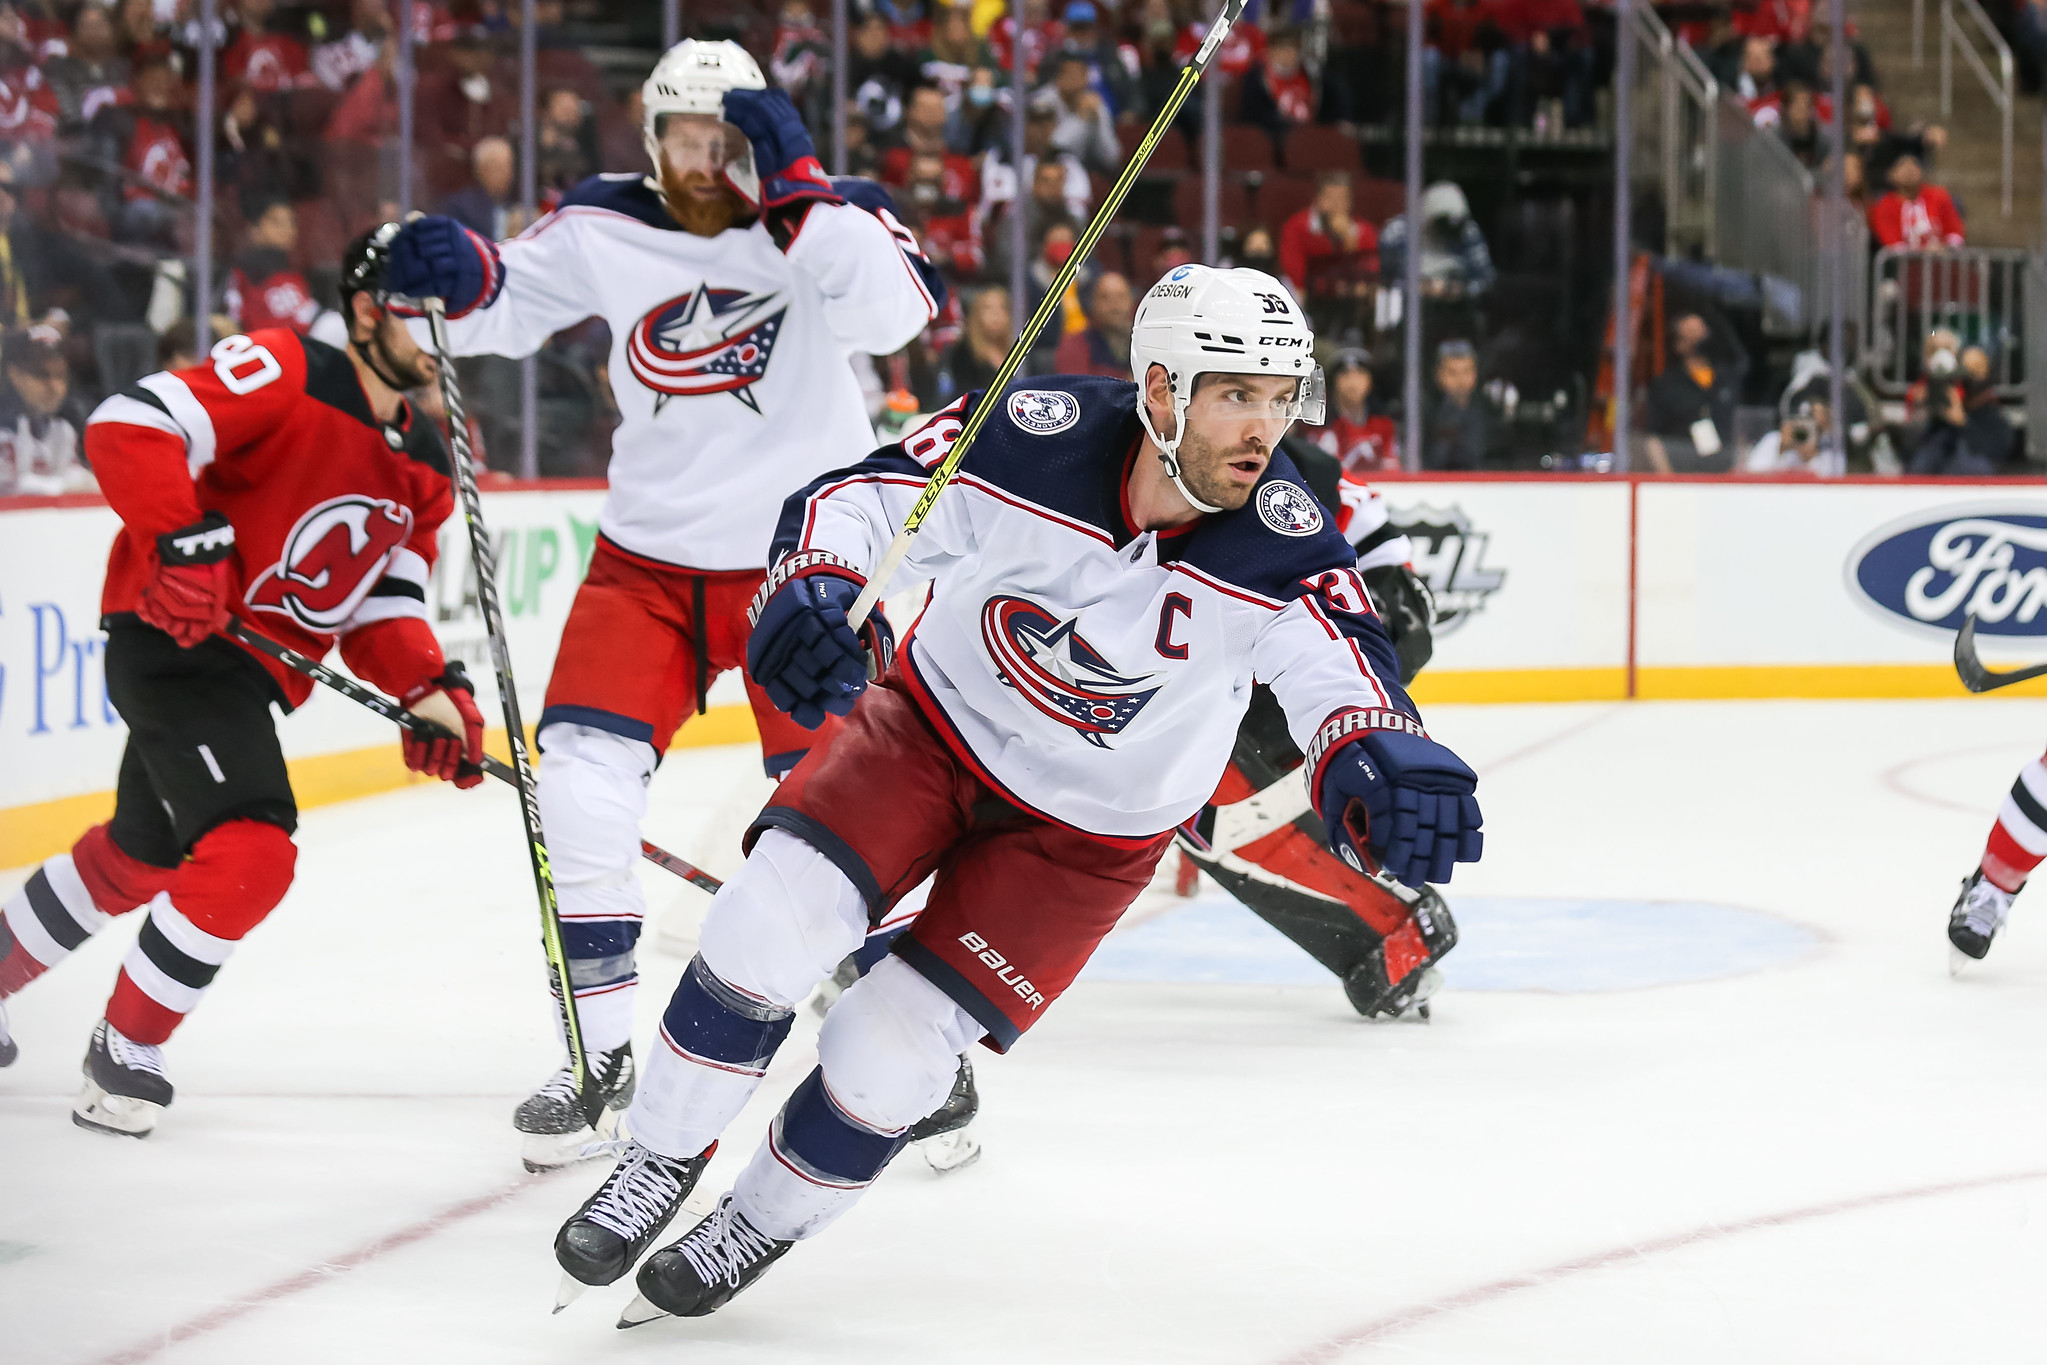 The issues plaguing the Columbus Blue Jackets